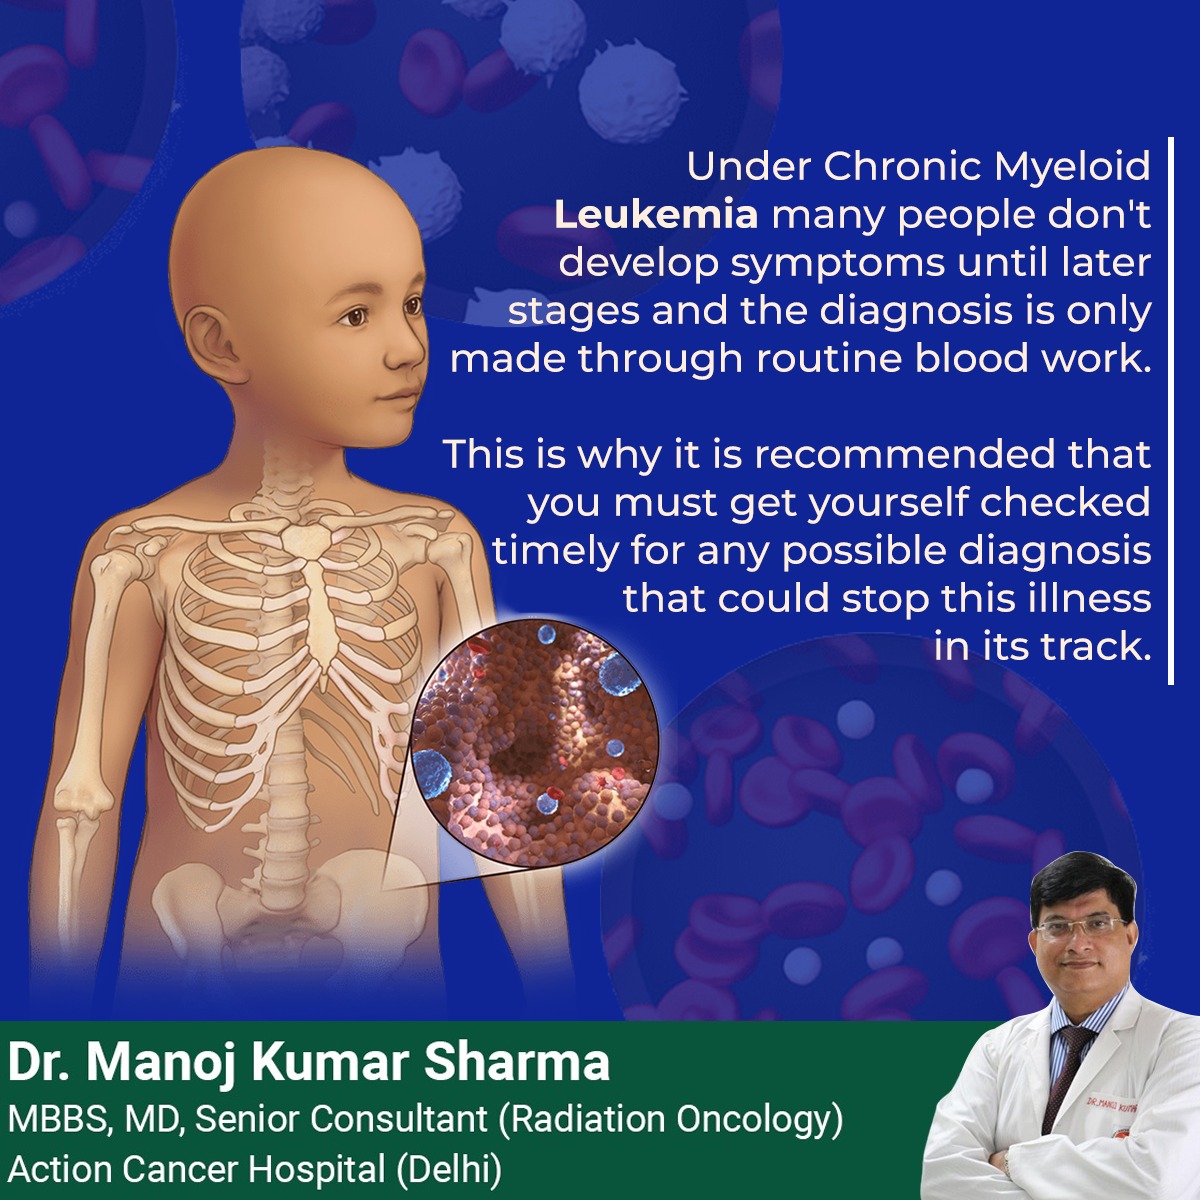 Chronic Myeloid Leukemia (CML) is a type of cancer that affects the blood and bone marrow. It is often asymptomatic in its early stages.
.
#ChronicMyeloidLeukemia #DrManoj #Treatmnent #Care #Oncologyst #Cancer #CancerCare #Cancersymptoms